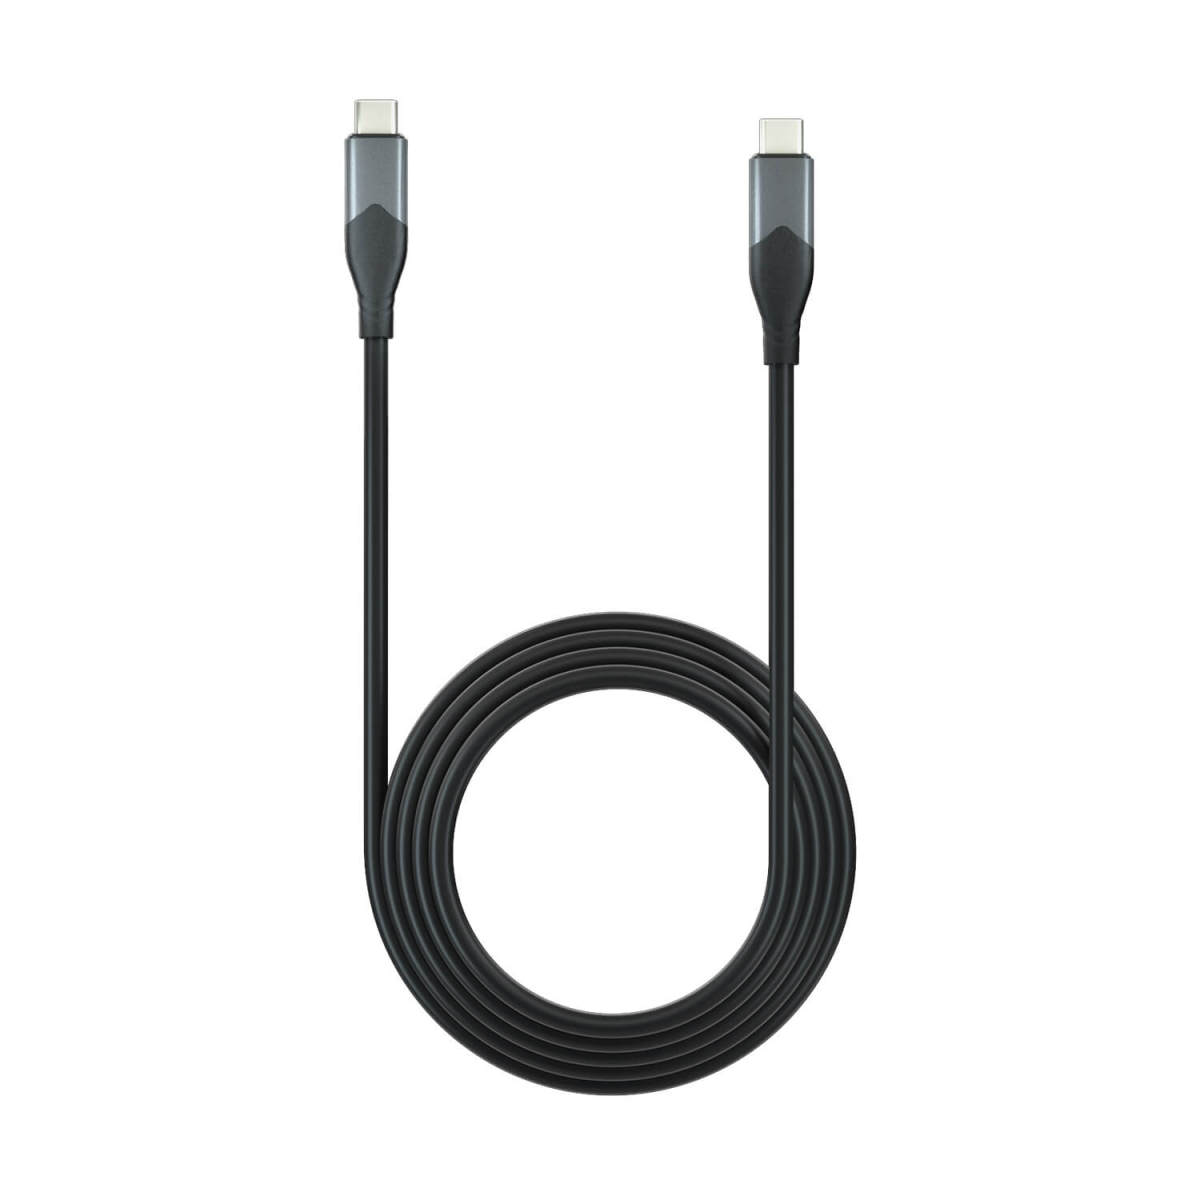 https://prd-huion.oss-accelerate.aliyuncs.com/6/9ce/usb-c-to-usb-c-cable-accessories-a.jpg?x-oss-process=image/resize,m_lfit,w_1200